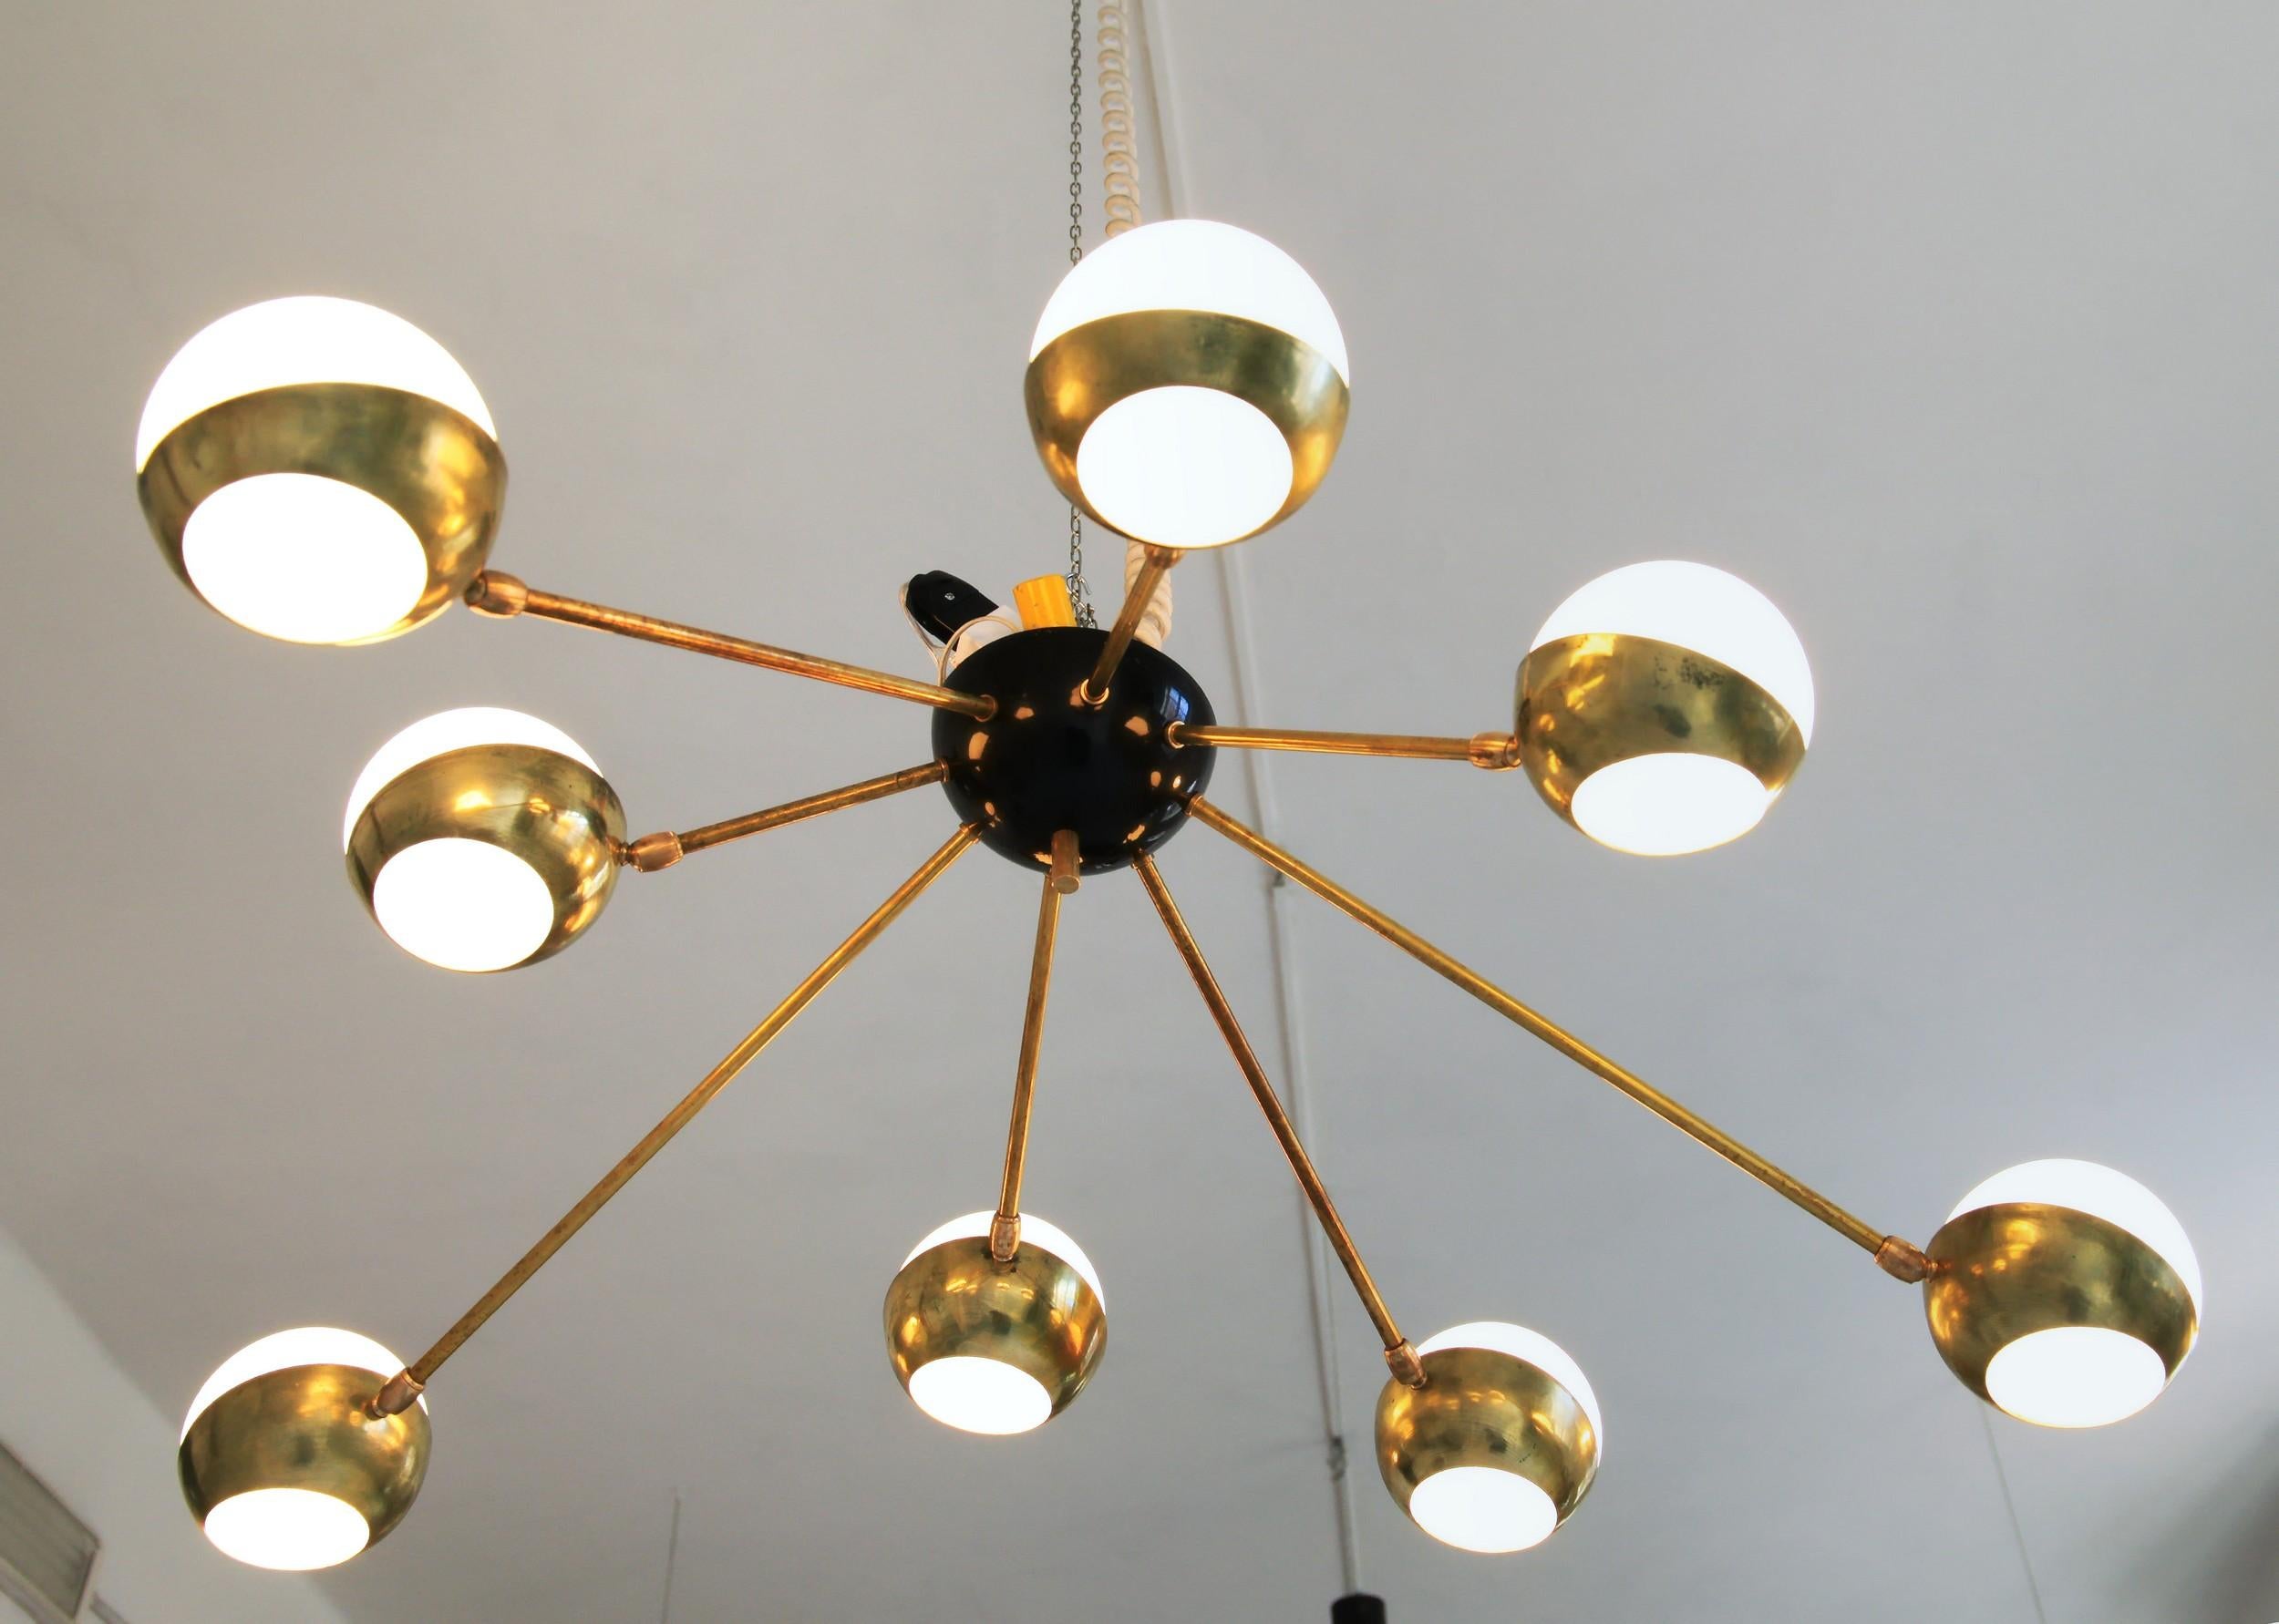 Italian Nido, Flush Mount Brass and Glass Chandelier 8 Arms, Low Ceiling Best, Free Ship For Sale